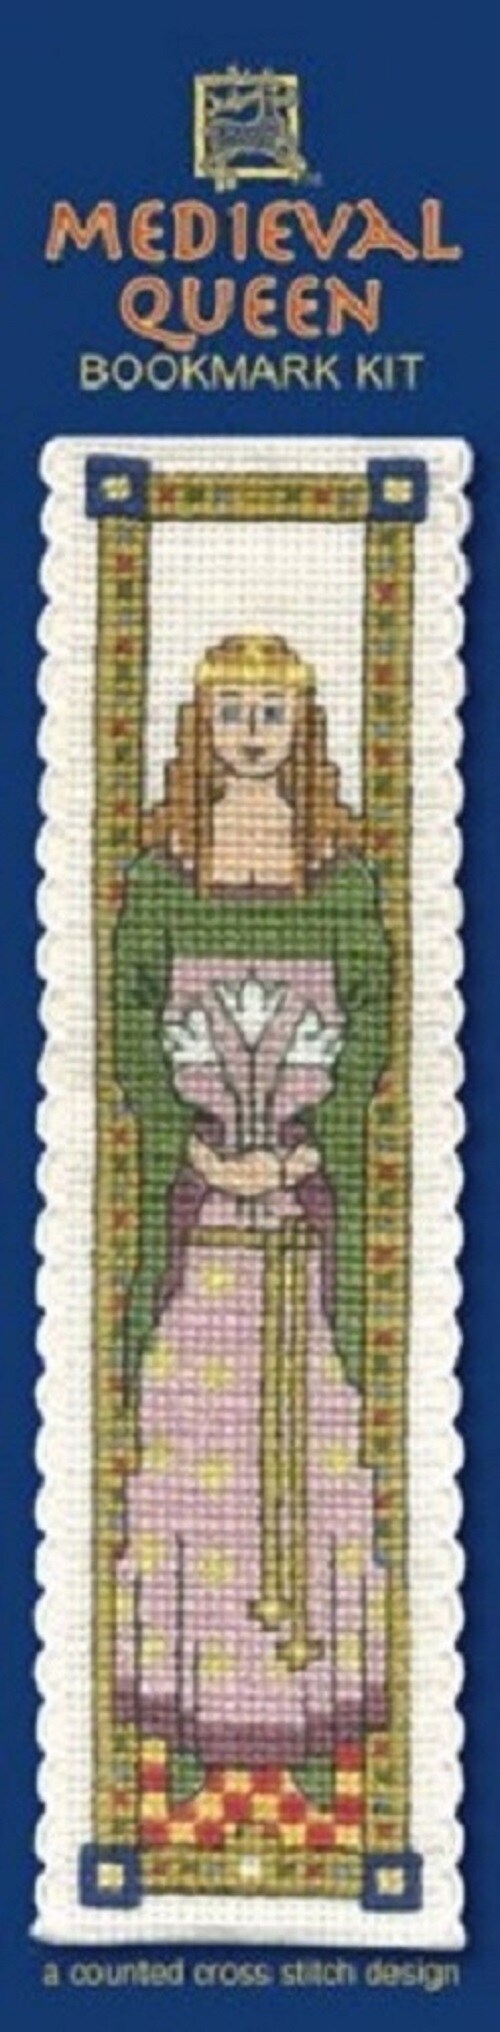 Textile Heritage Counted Cross Stitch Bookmark Kit - Medieval Queen